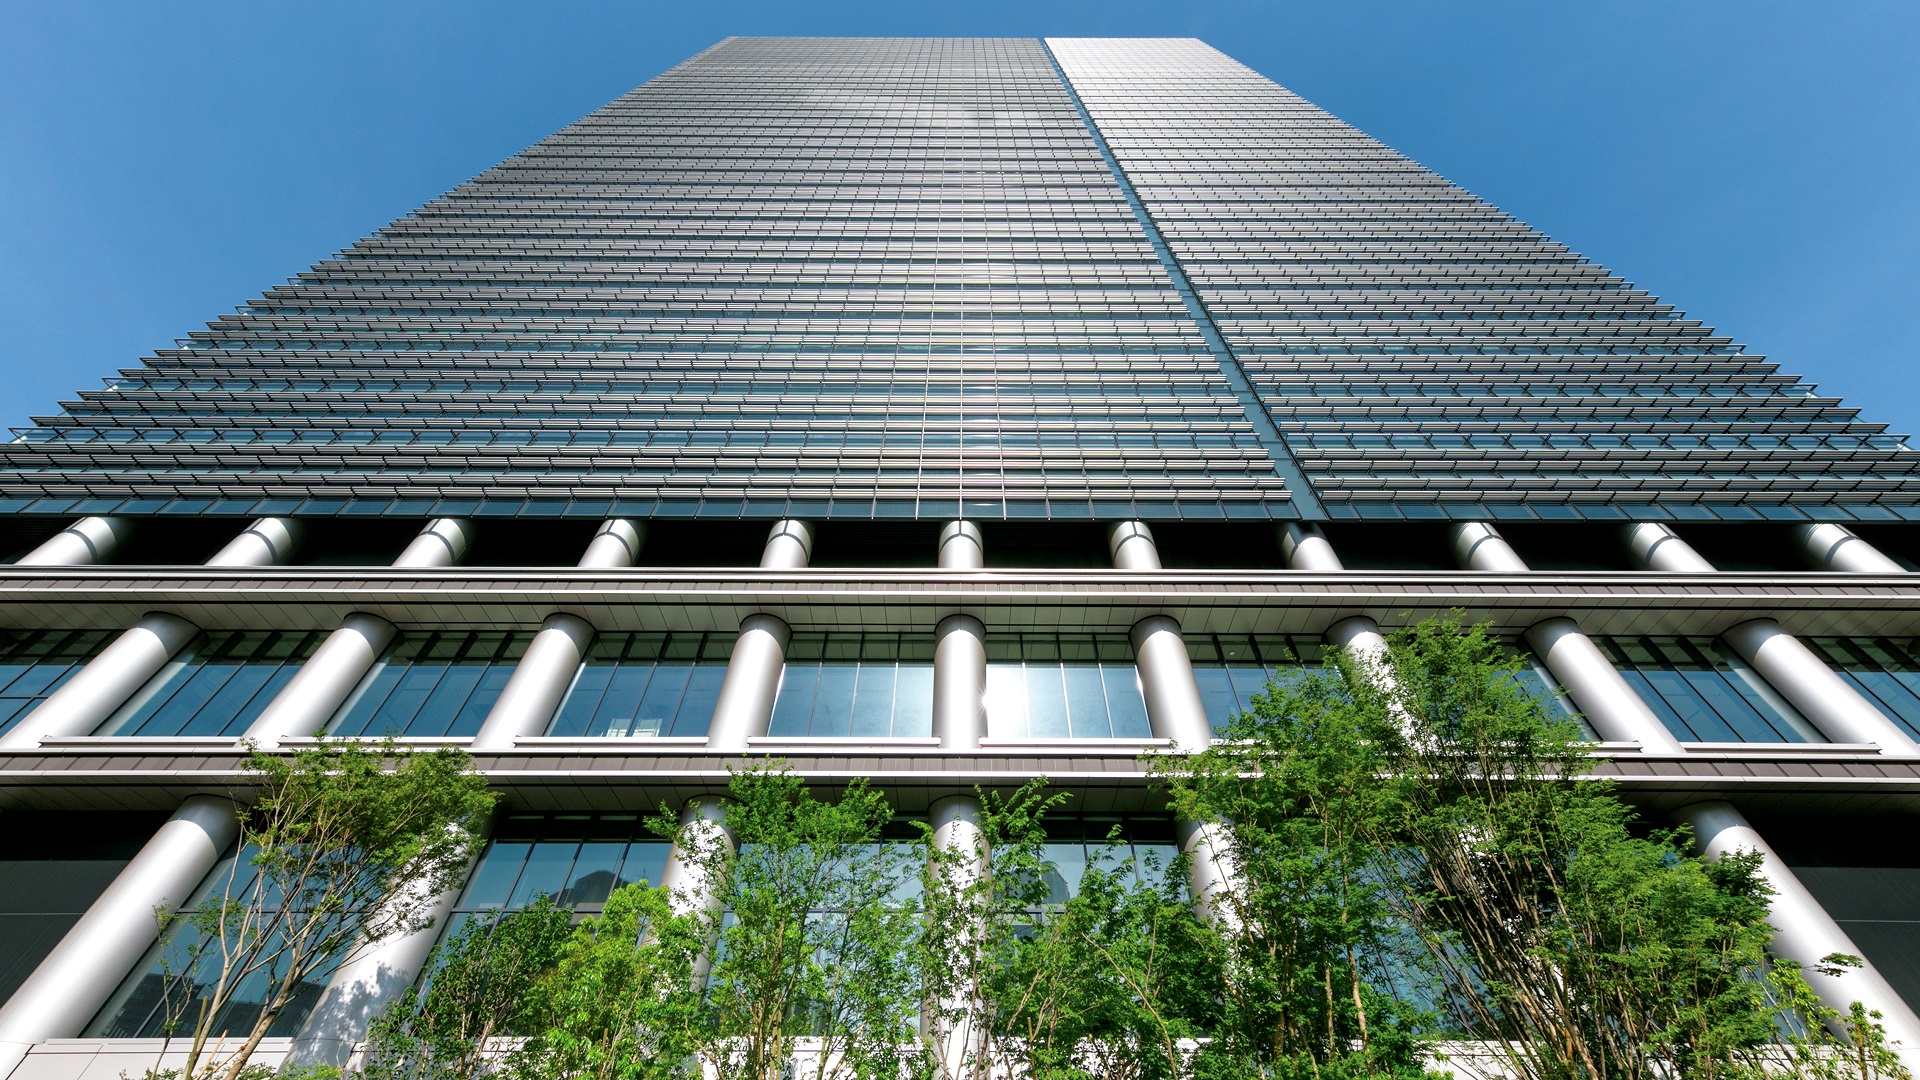 Sumitomo headquarters building with green plants.